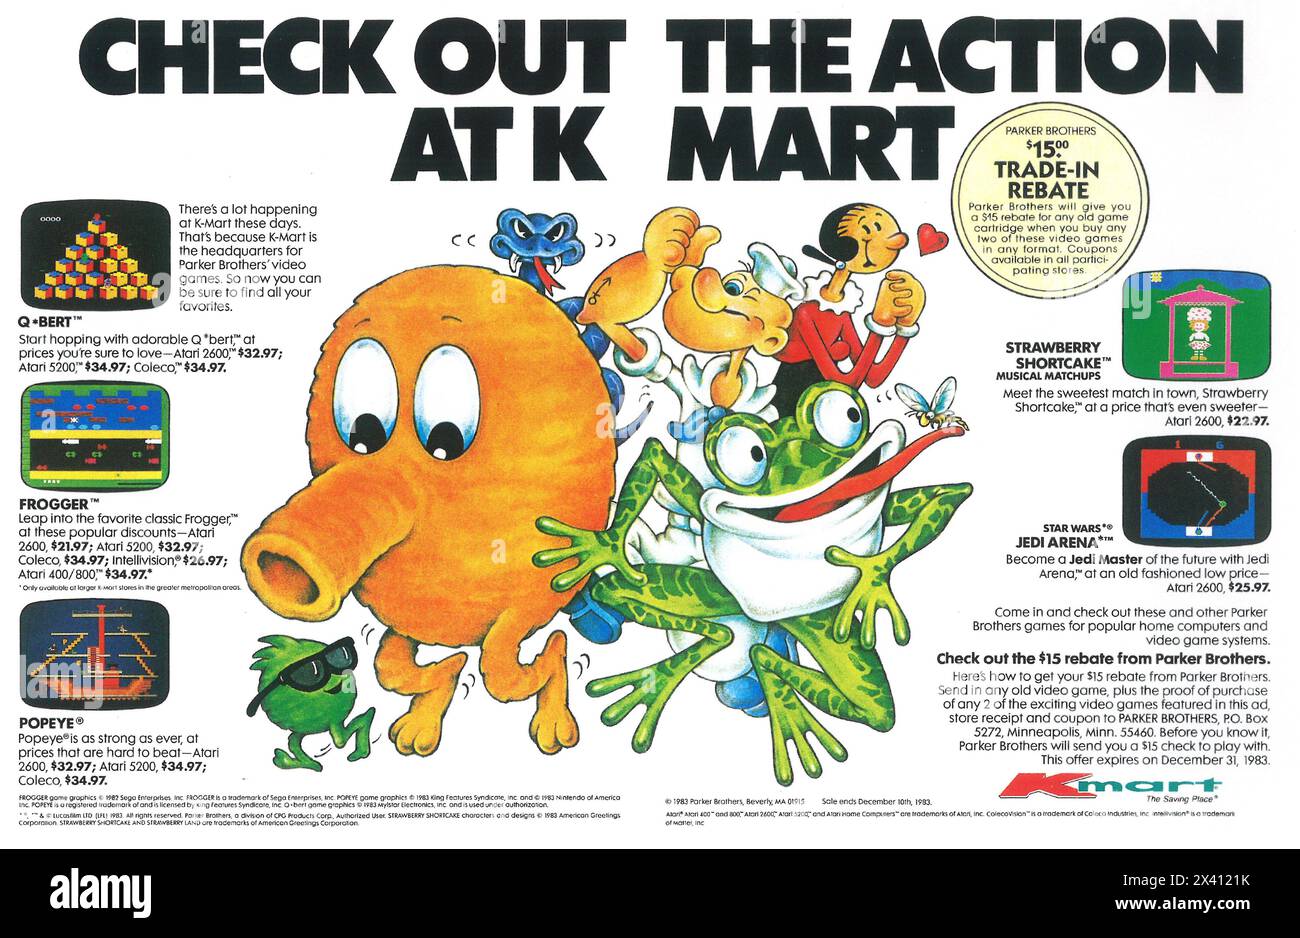 1983 Parker Brothers video games at K Mart ad - Frogger, Q Bert, Star Wars Jedi Arena games, Popeye Stock Photo